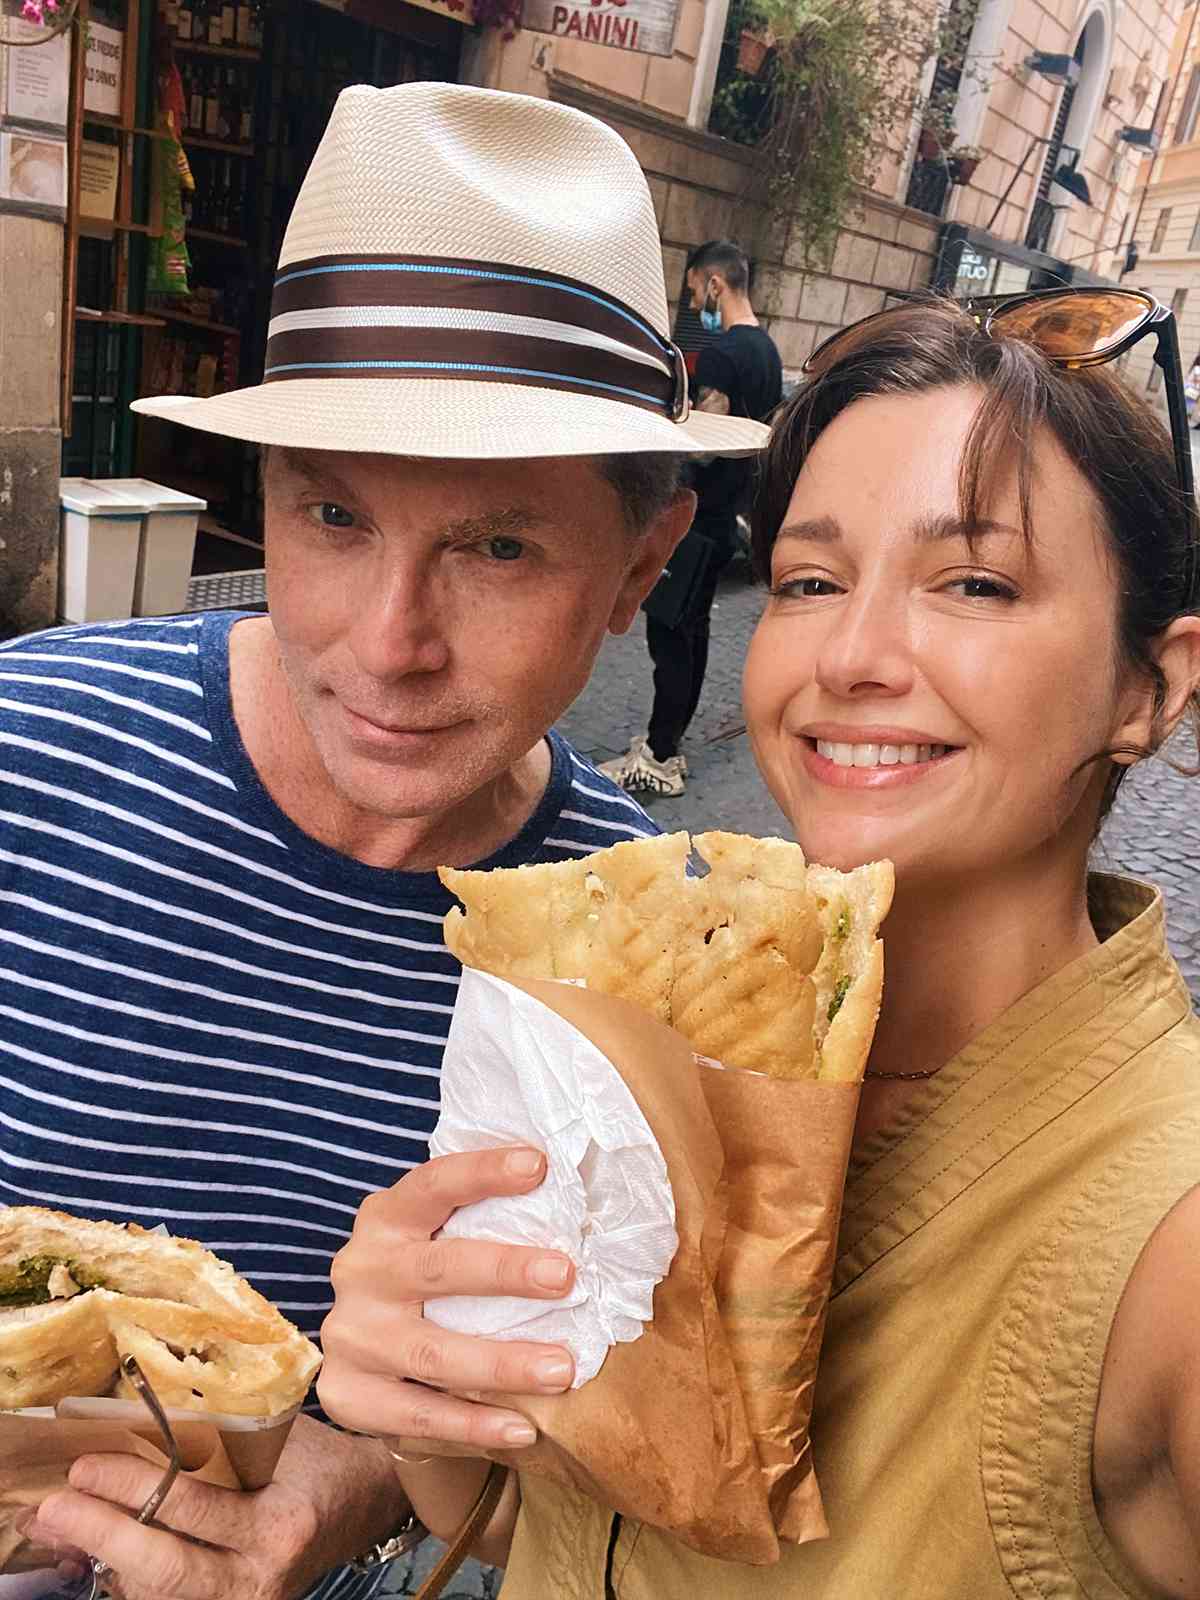 Who Is Bobby Flay Dating? Know About His Girlfriend And Net Worth